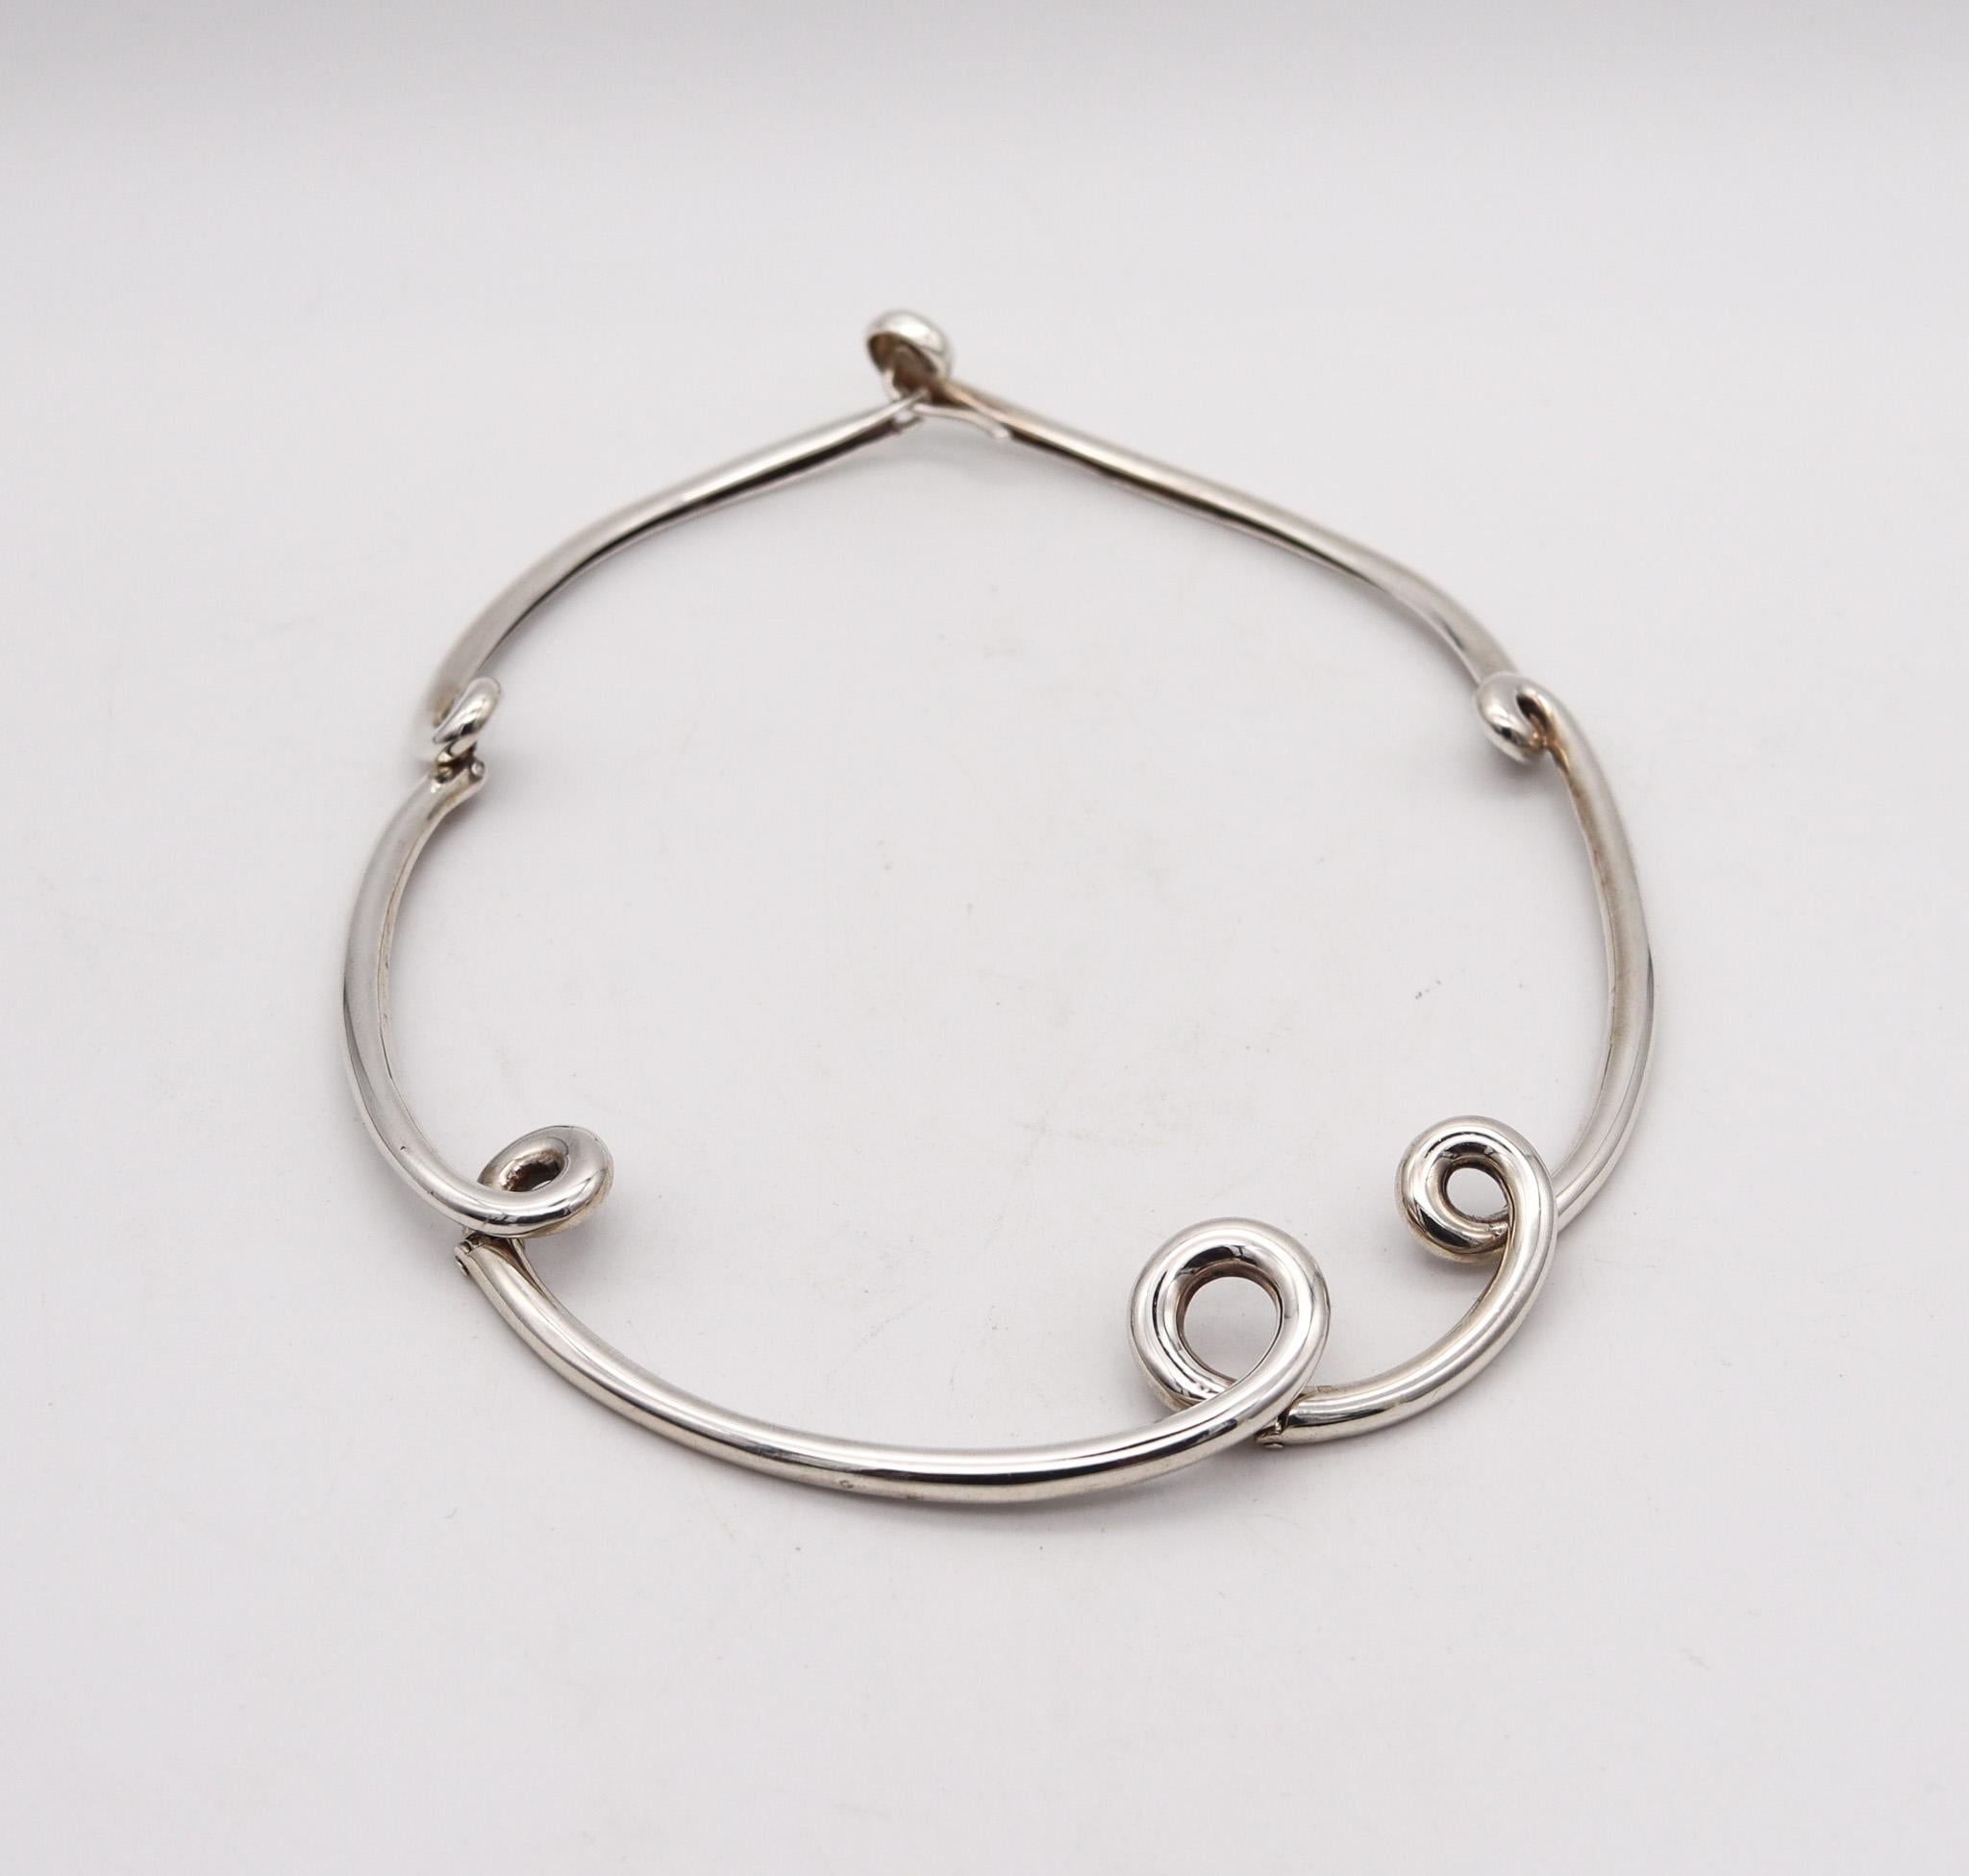 Modernist Angela Cummings 1991 Studio Twisted Sculptural Necklace In .925 Sterling Silver